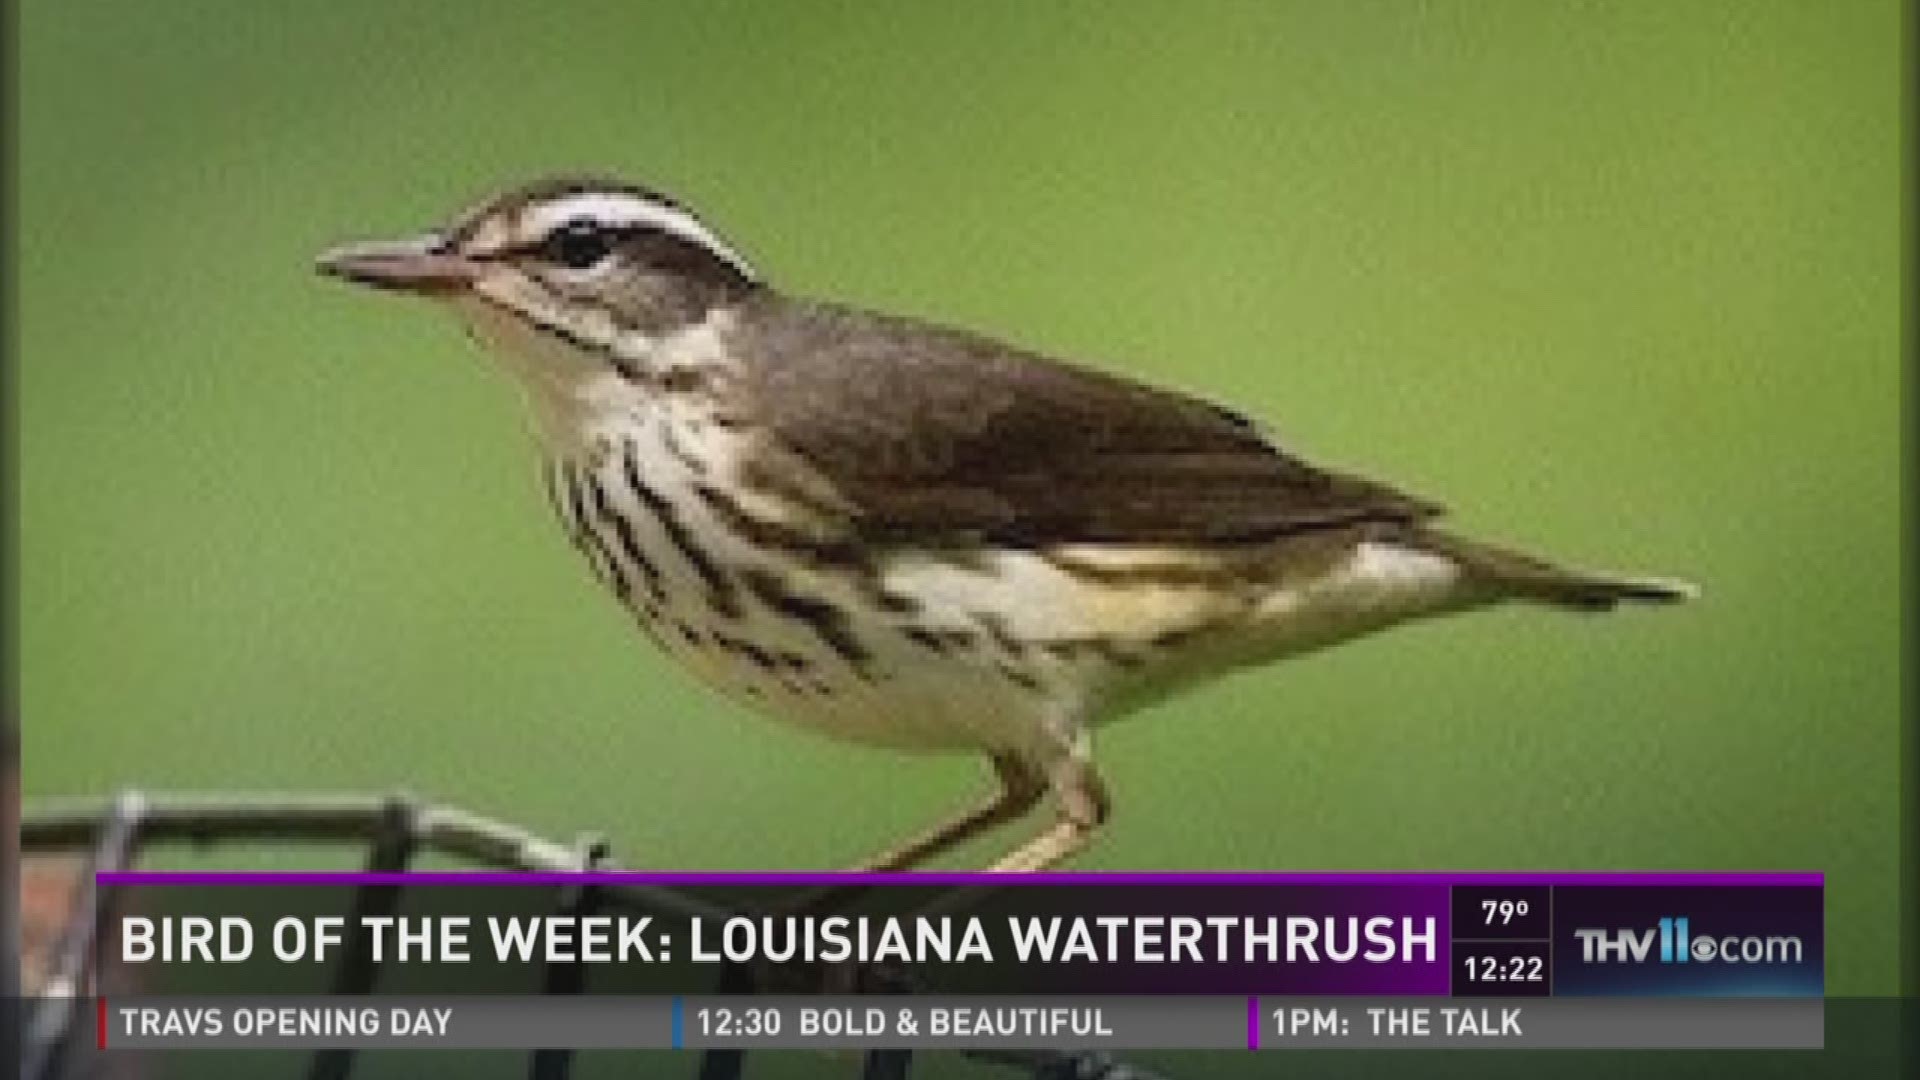 A bird of forest streams, the Louisiana Waterthrush looks more like a thrush or sparrow than the warbler it is. - THV11.com 04/07/16